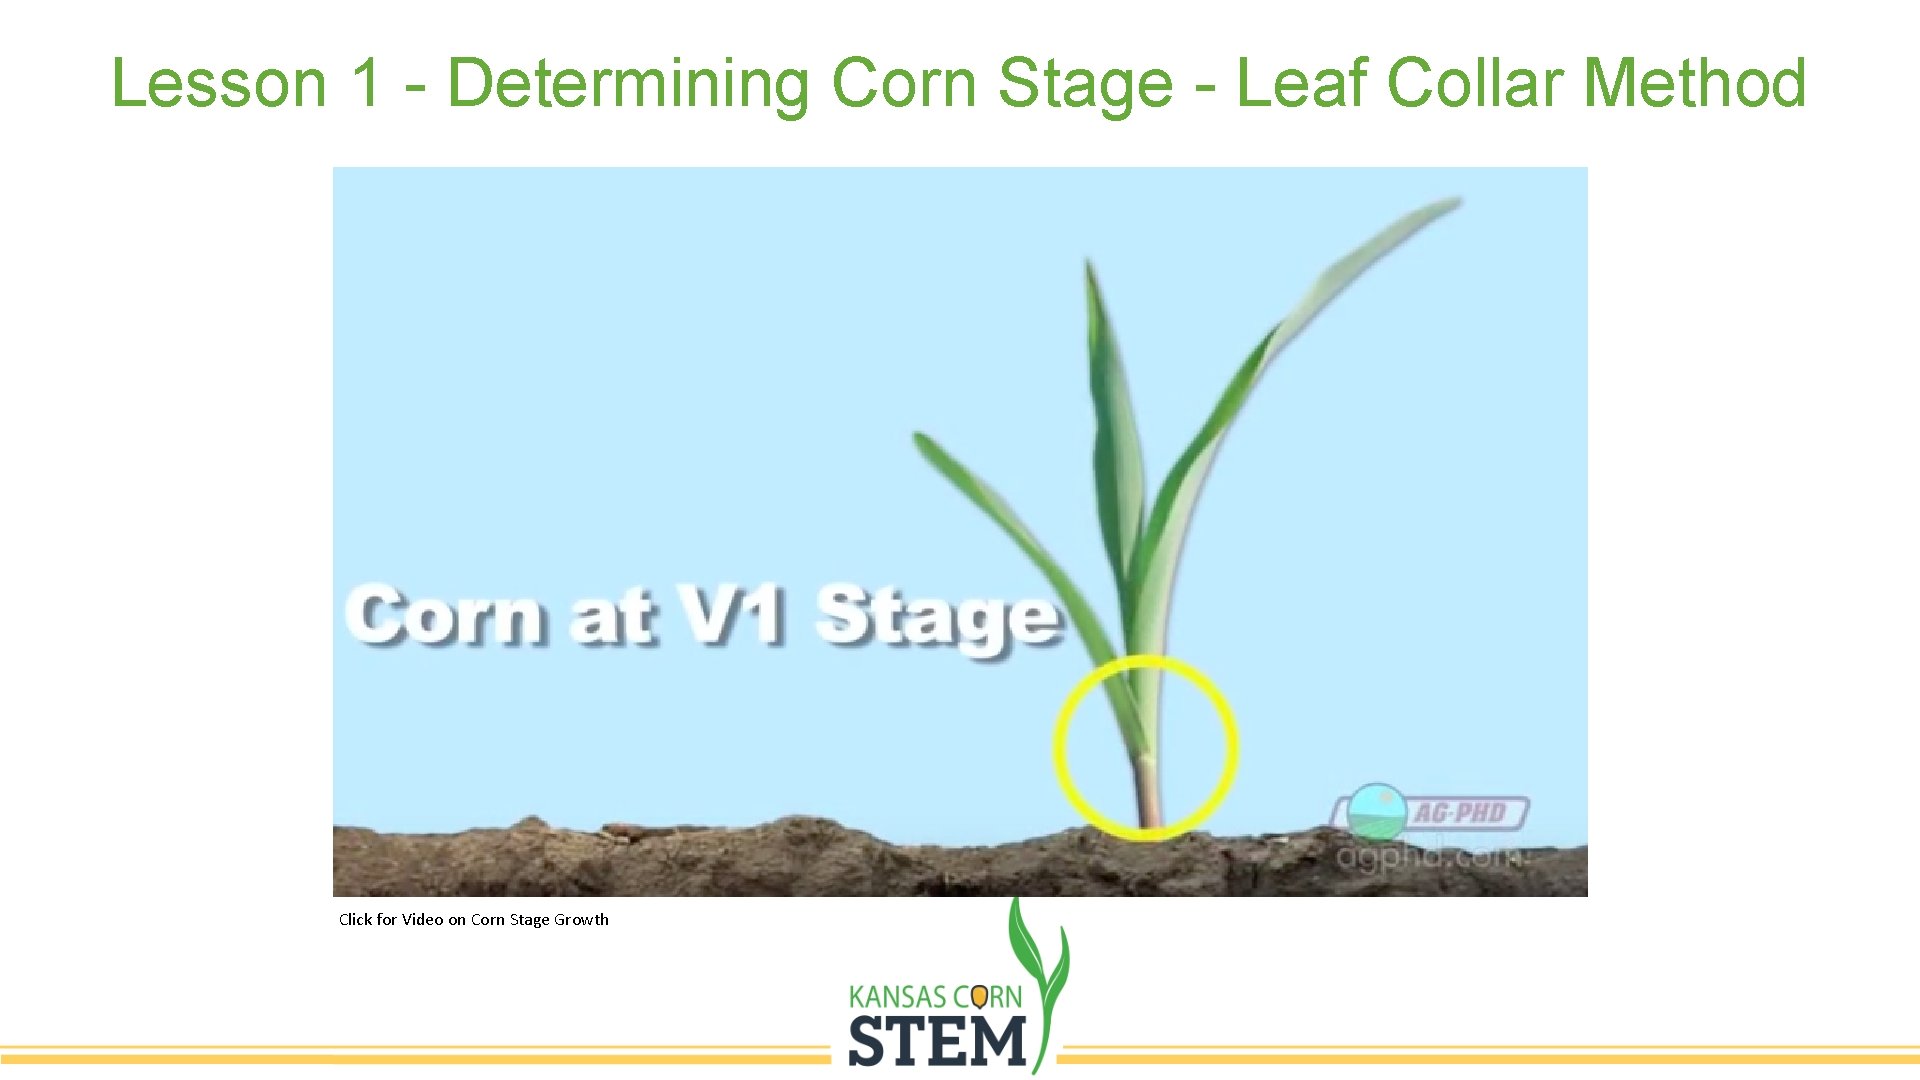 Lesson 1 - Determining Corn Stage - Leaf Collar Method Click for Video on